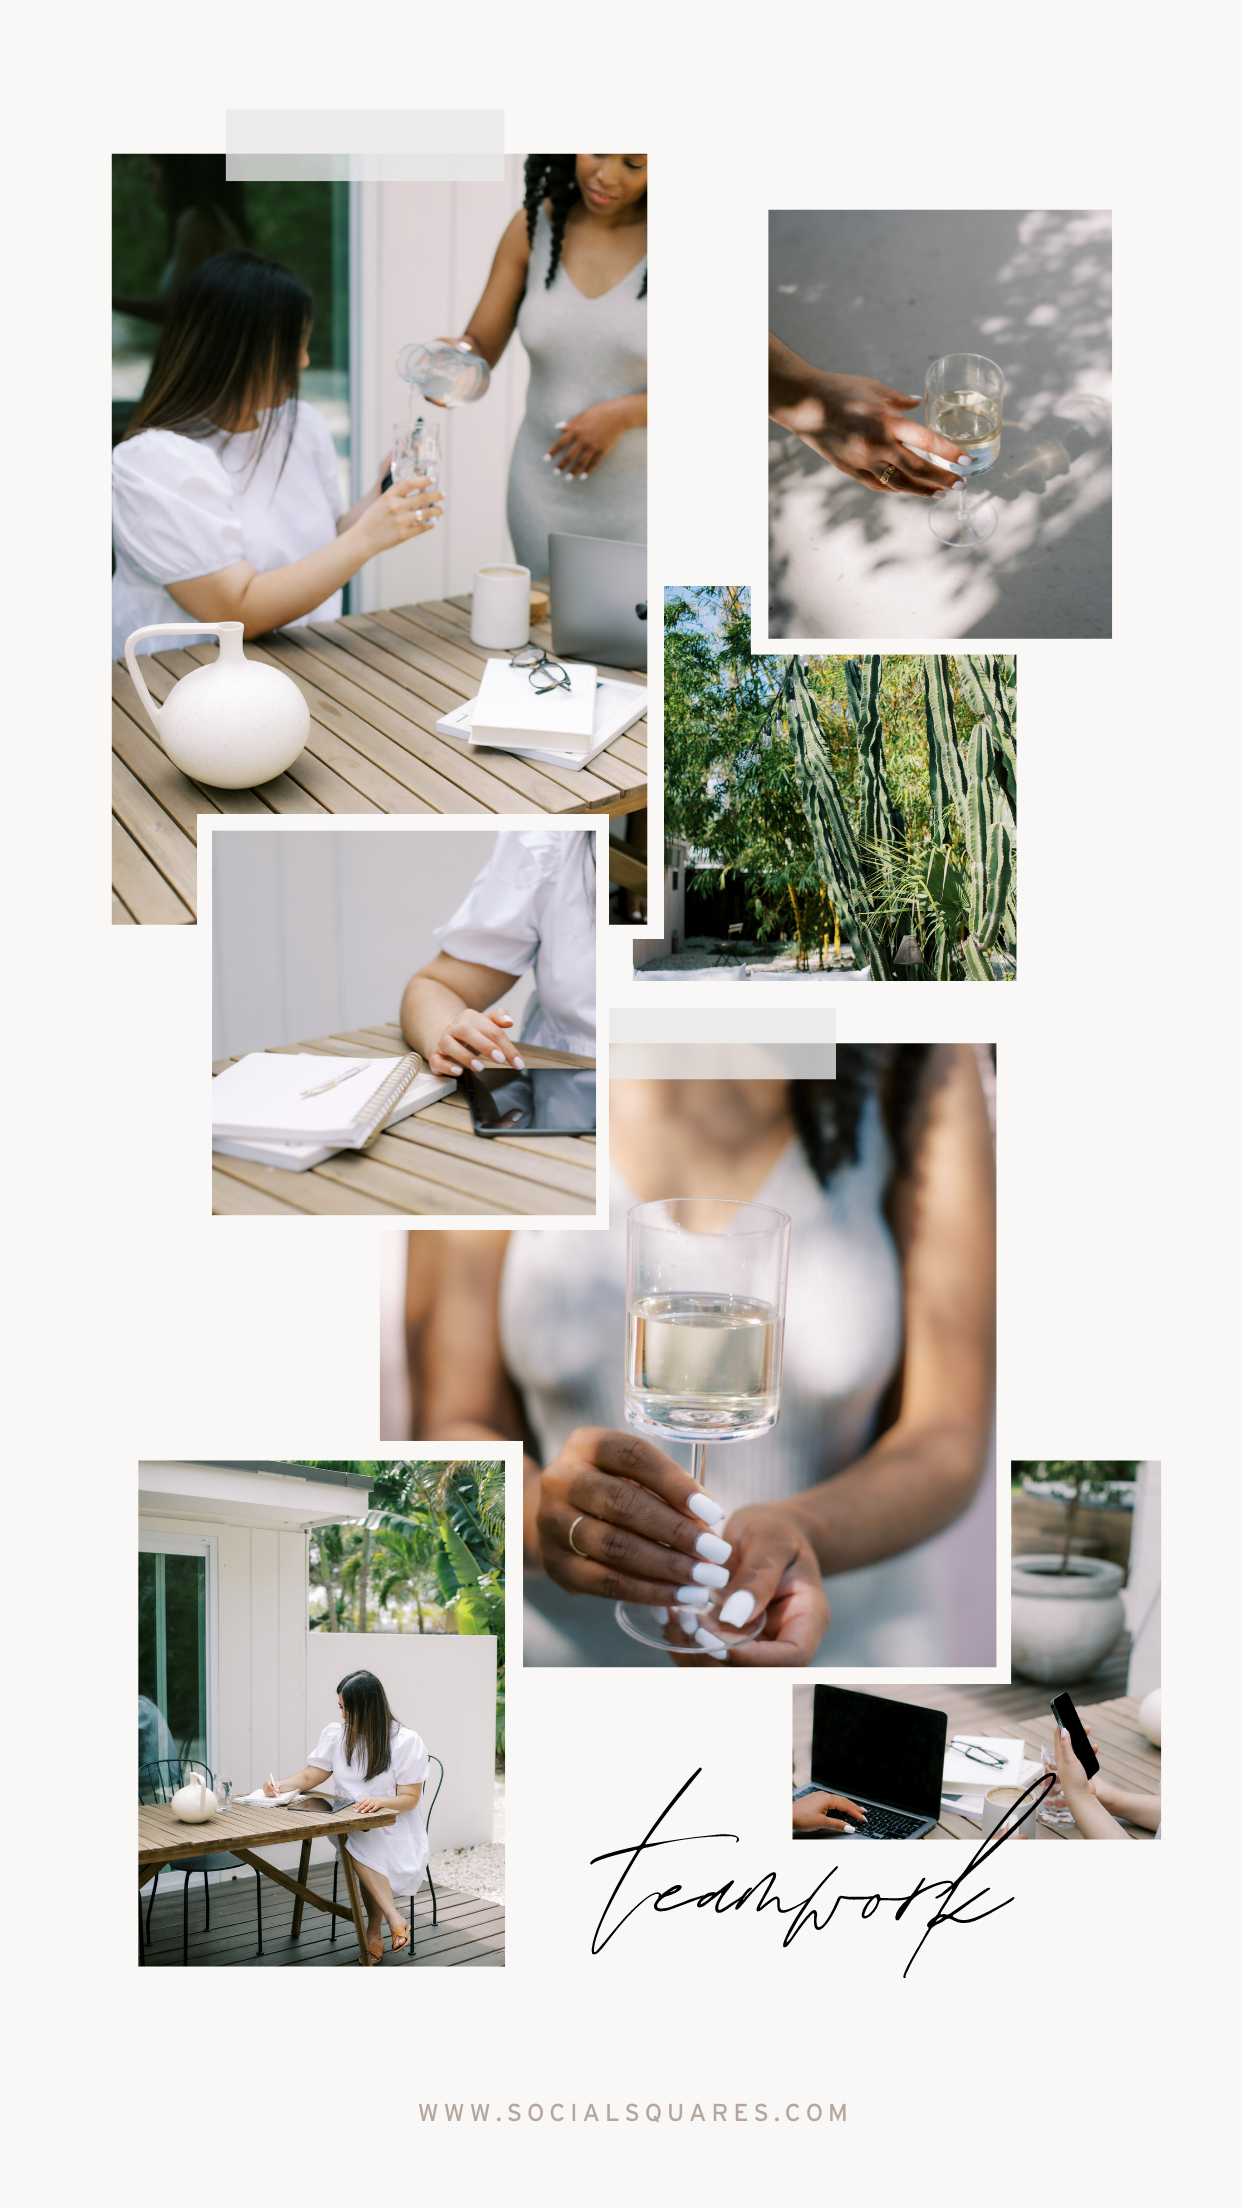 Brand inspiration moodboard for a feminine brand. Full of close up feminine images with a patio setting